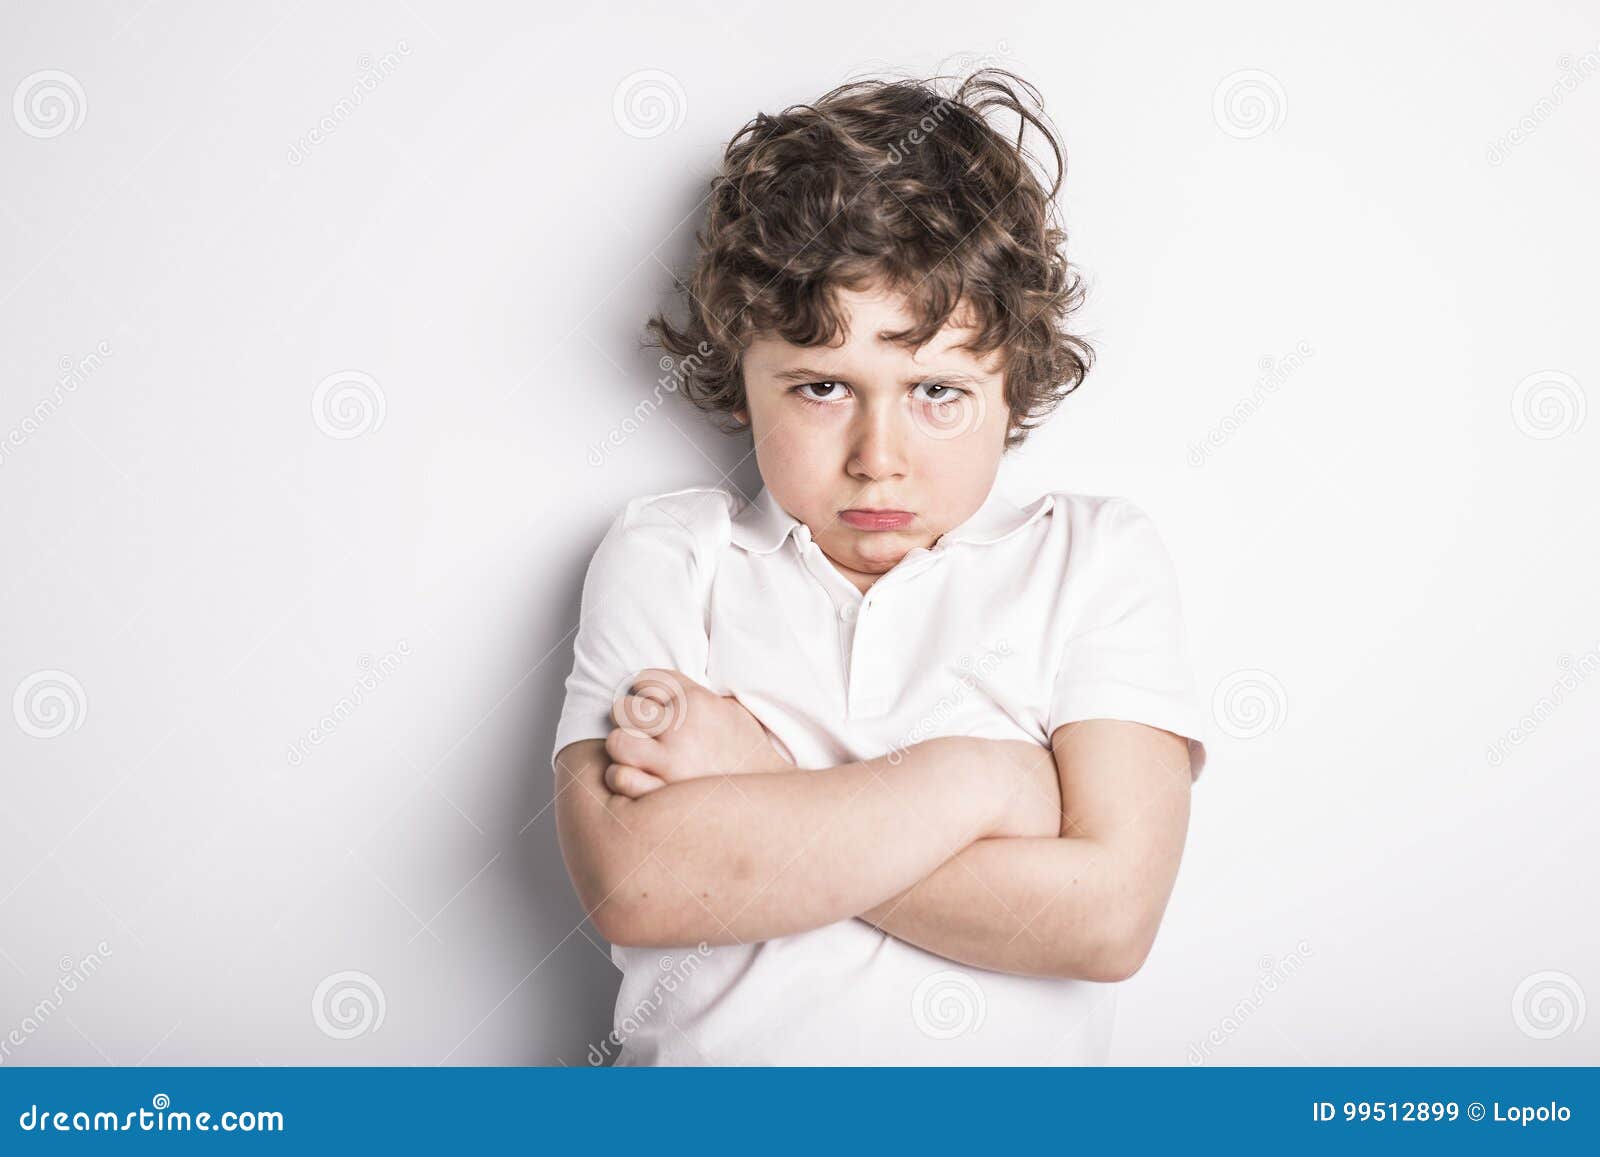 head and shoulders close up portrait of young boy with sulk attitude